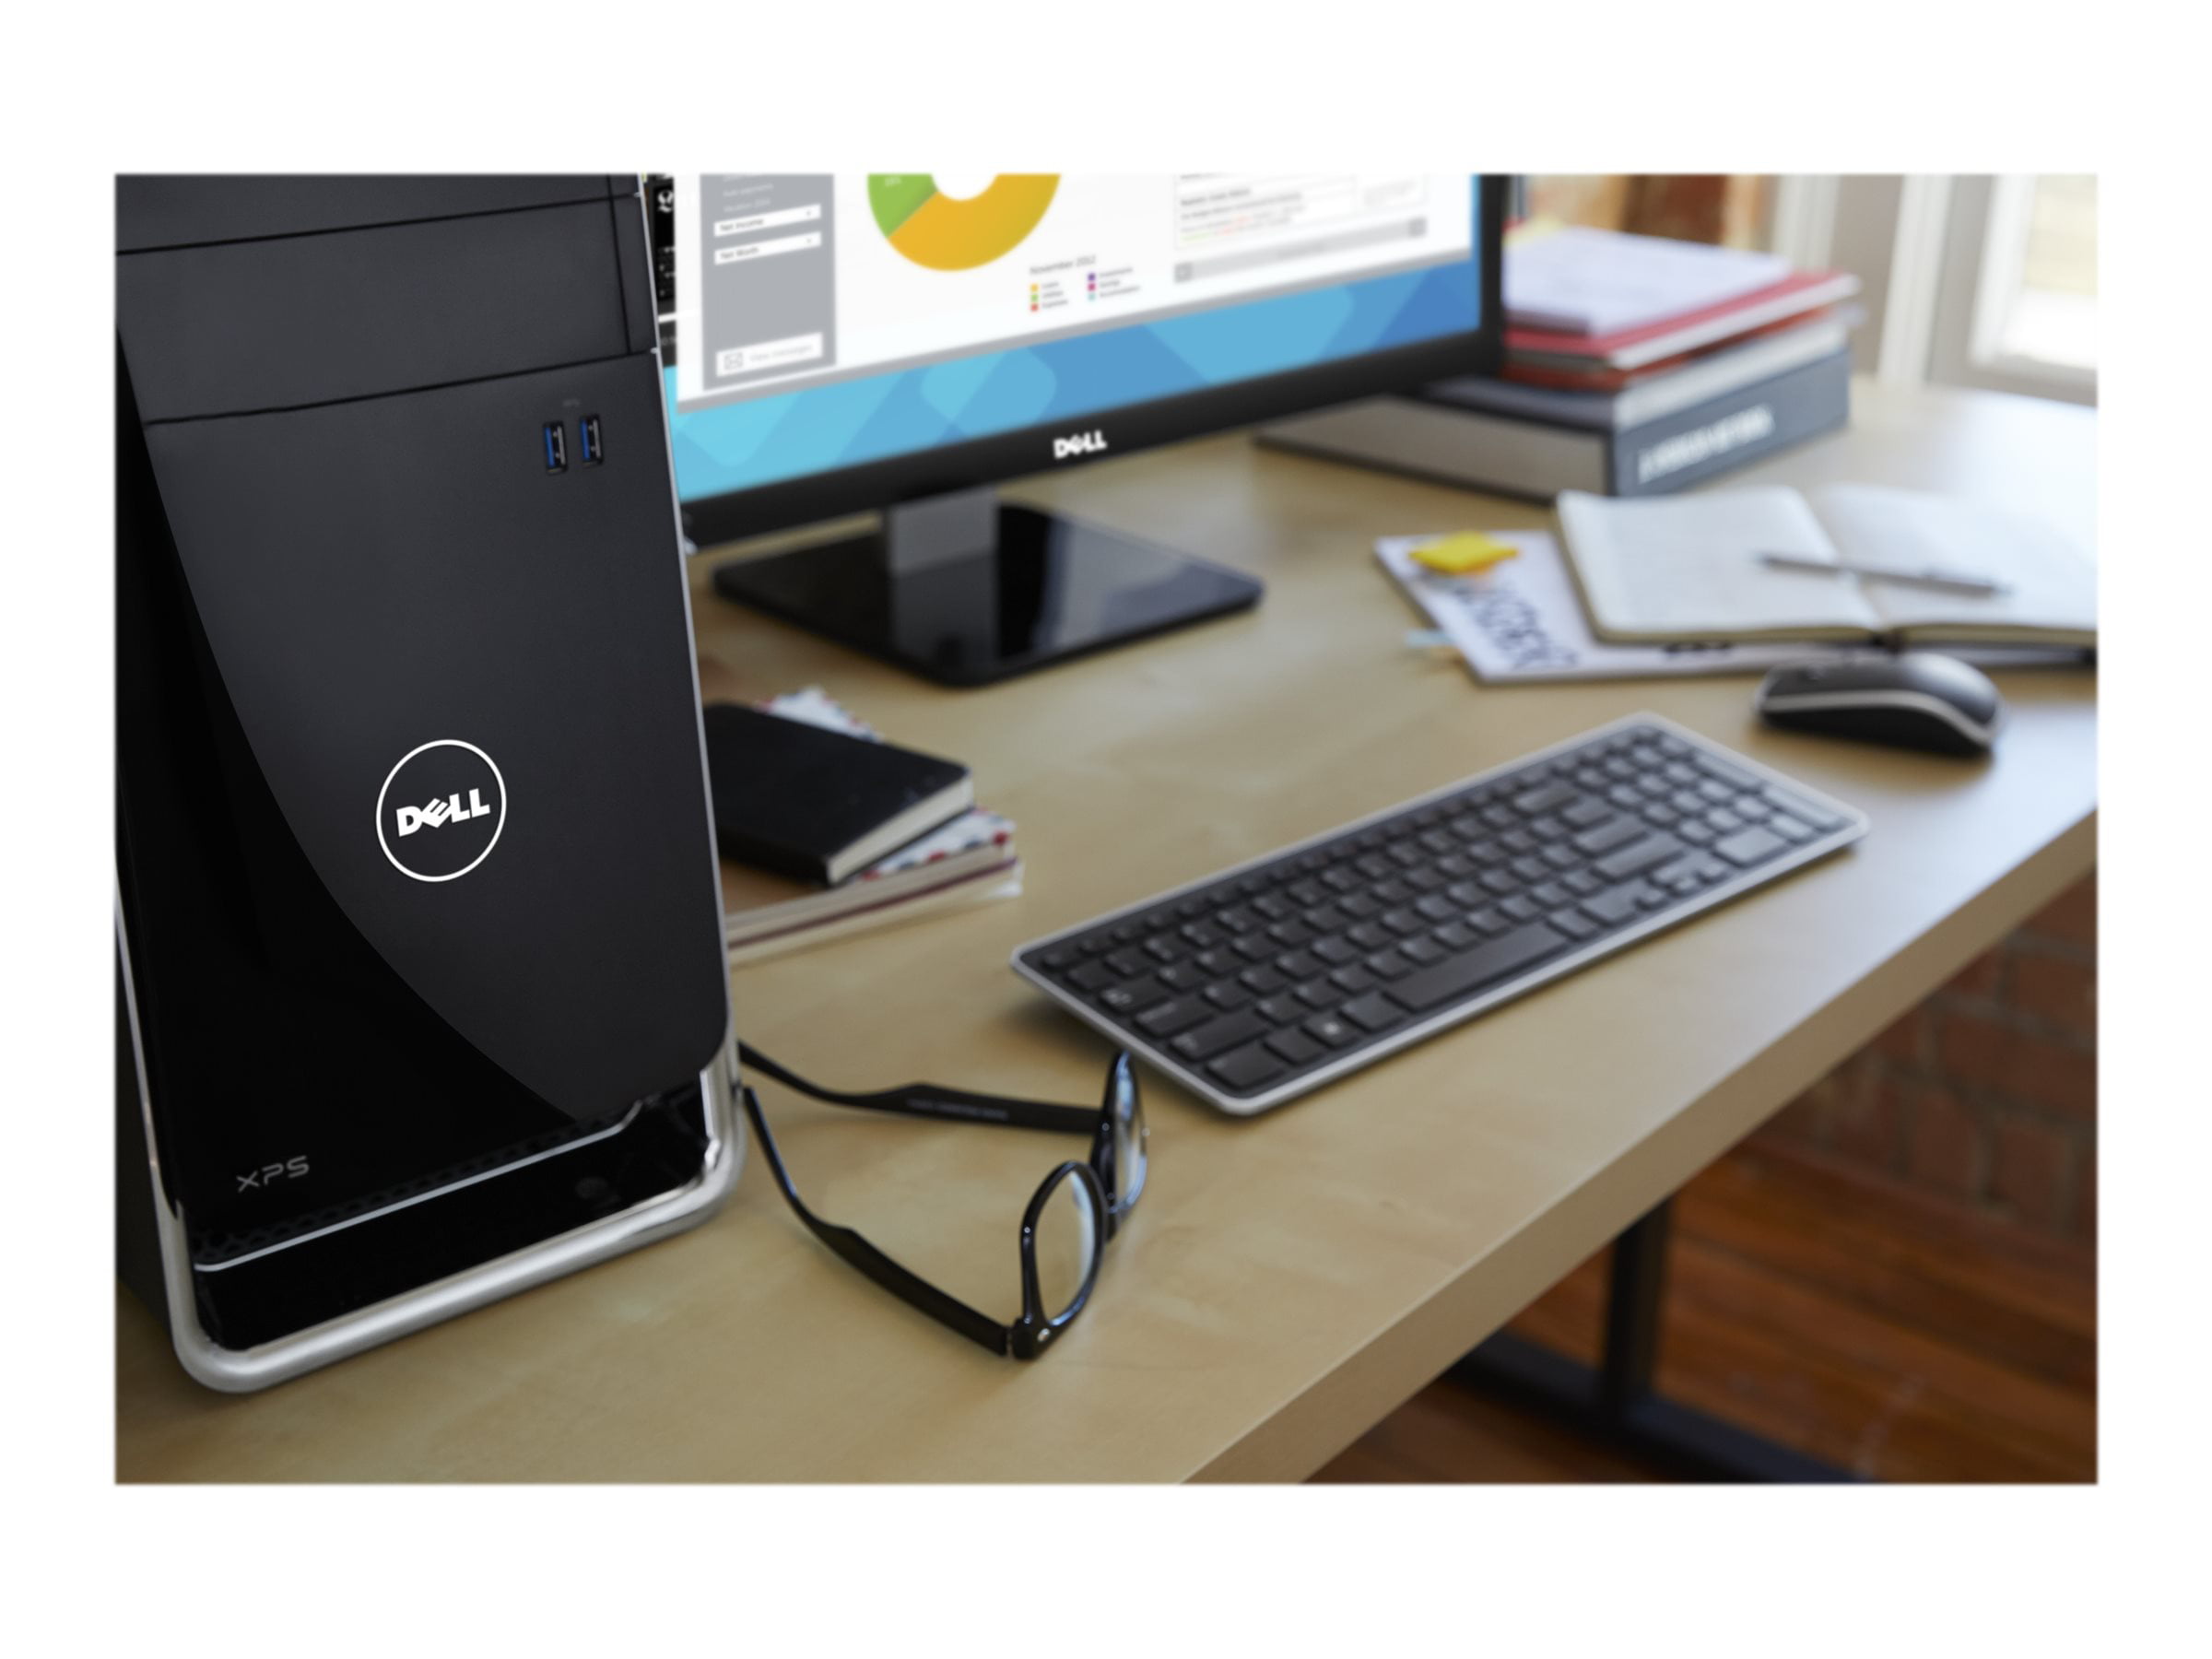 Dell XPS 8900 - MT - Core i5 6400 / 2.7 GHz - RAM 8 GB - HDD 1 TB